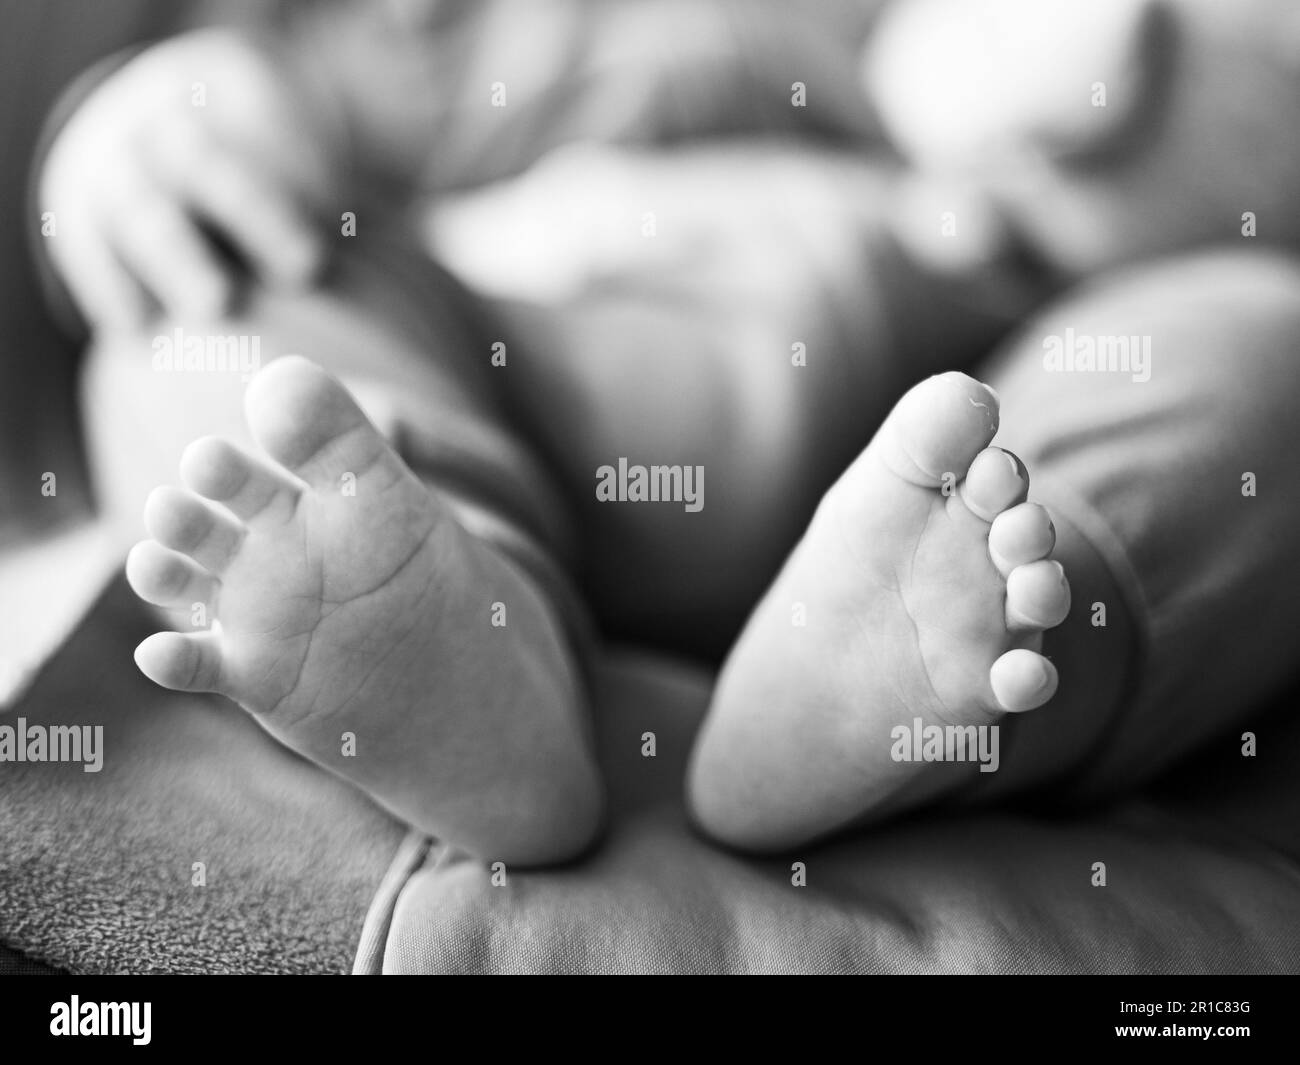 Close-up of cute little baby feet, innocence concept. Black and white image Stock Photo